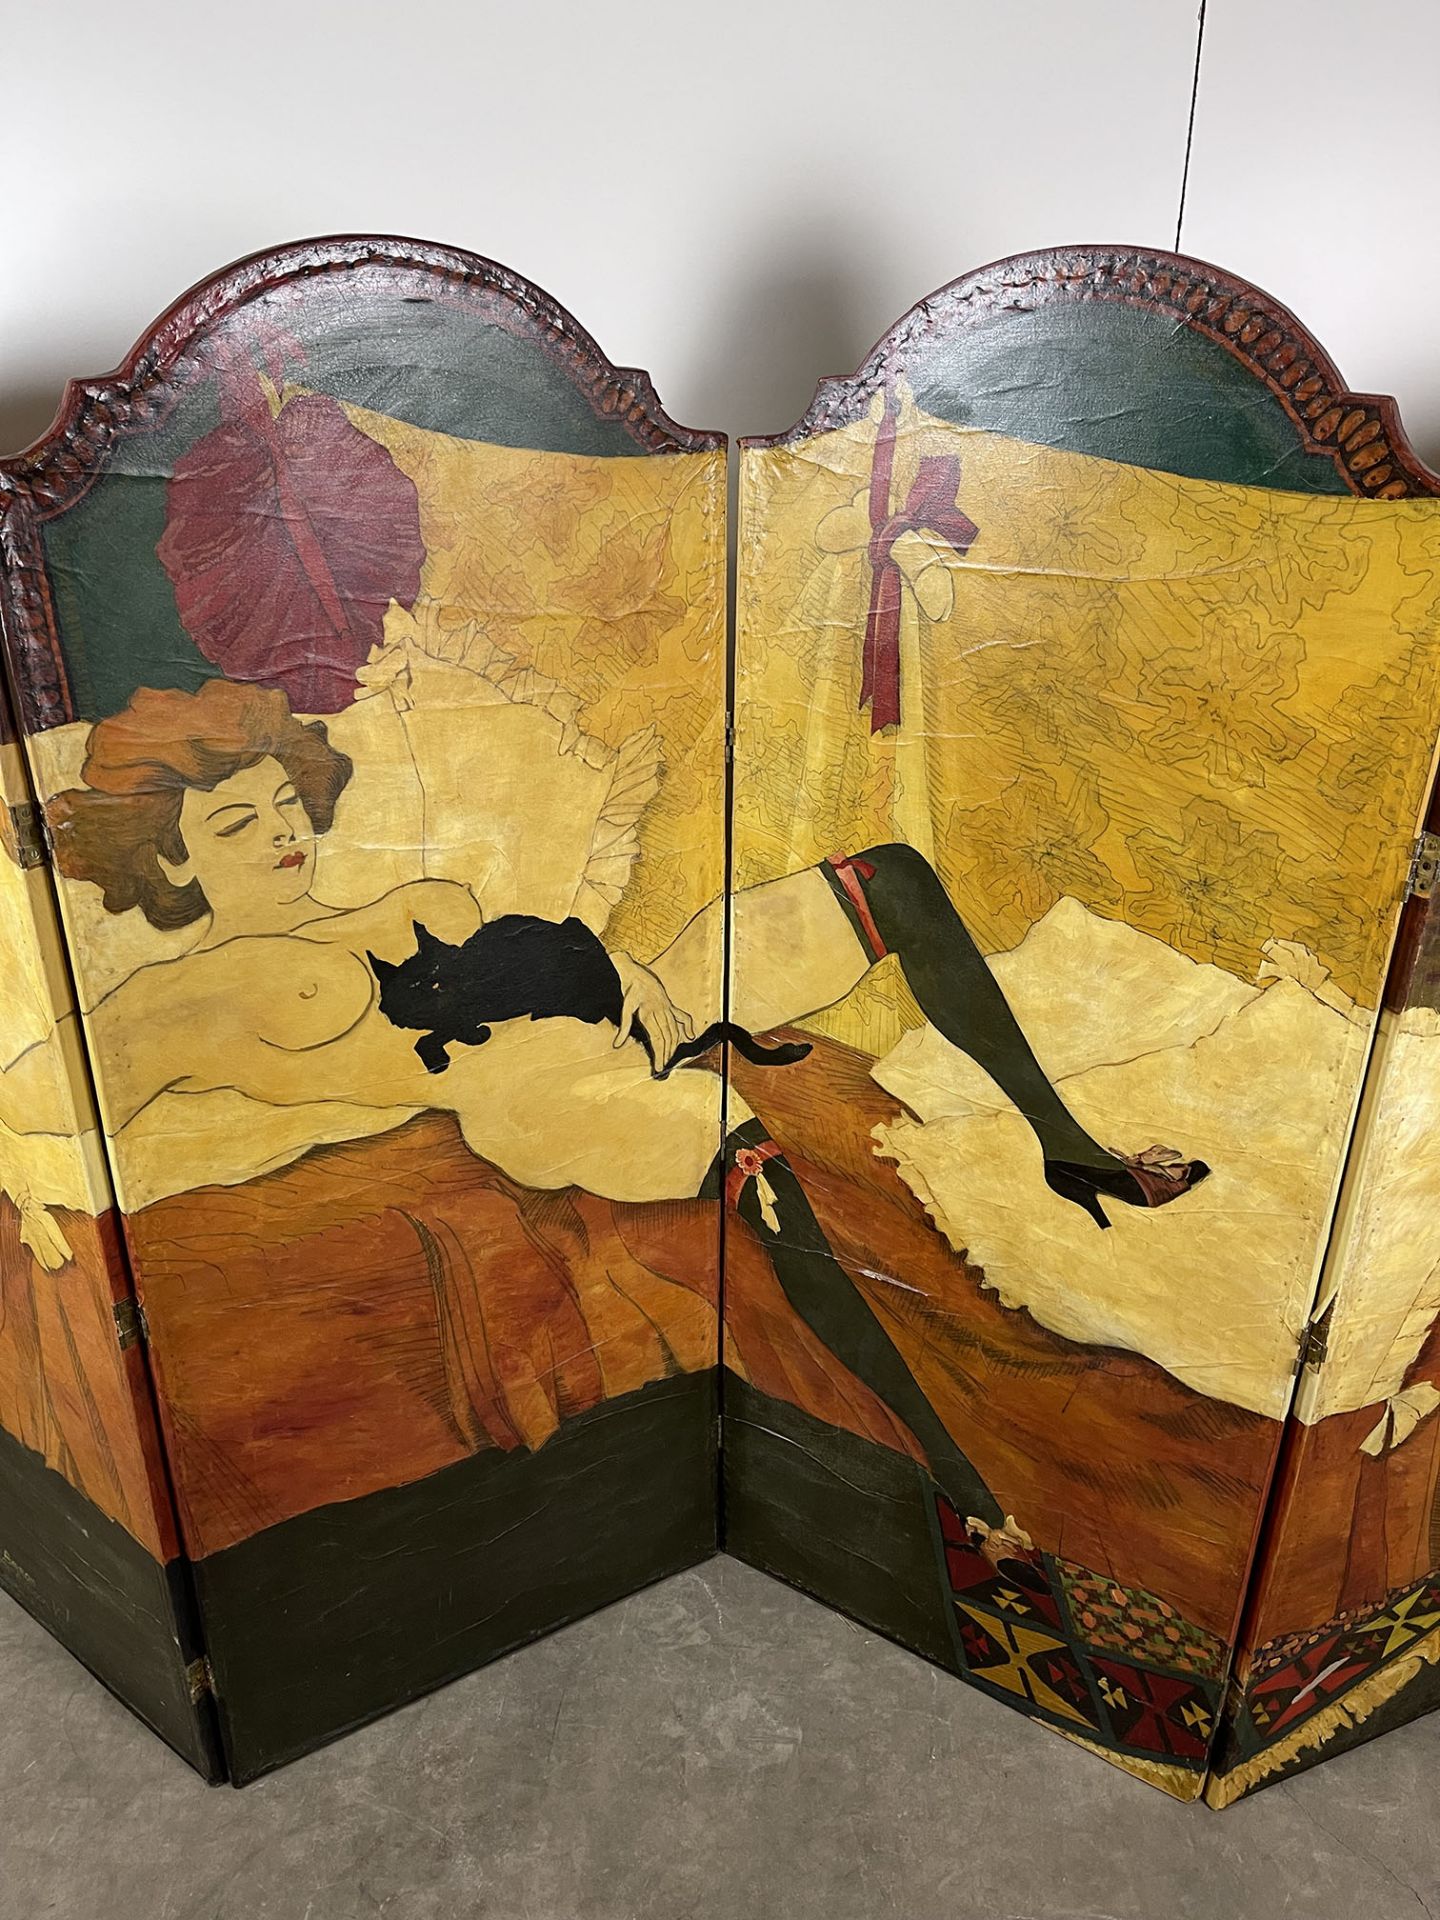 Tetraptych (4 Section) Folding Screen Erotic Painting - Image 9 of 17